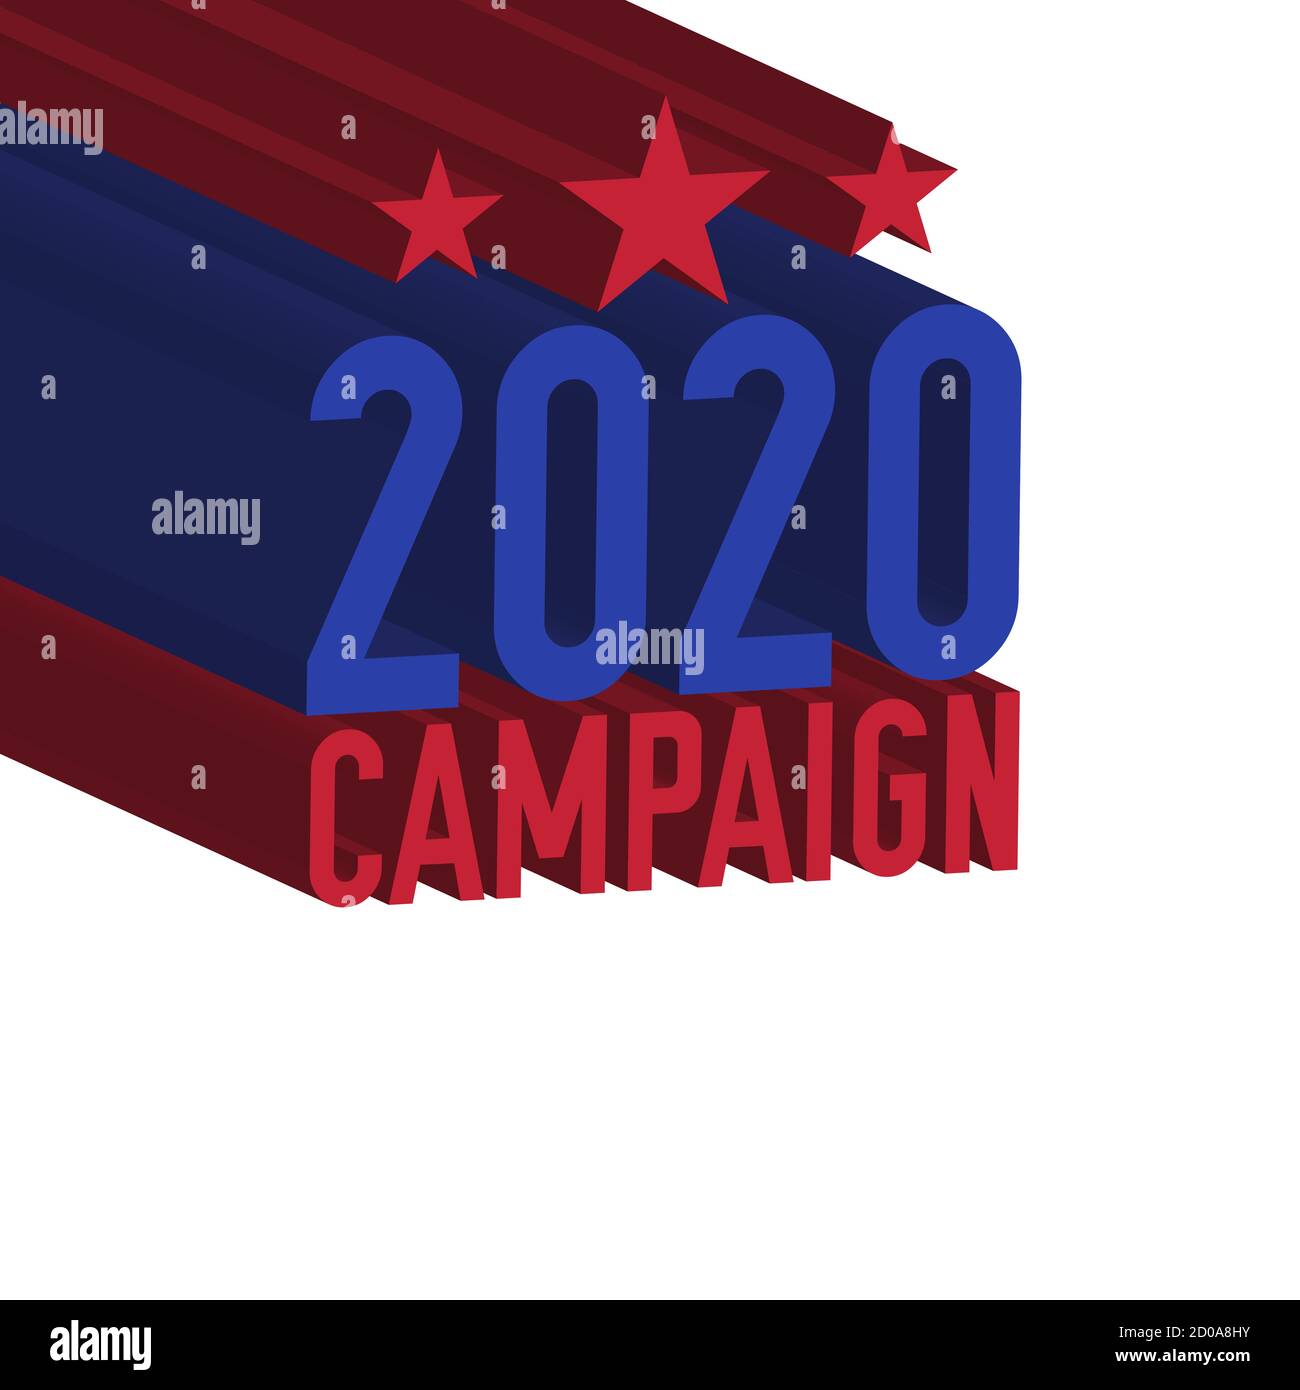 2020 campaign. United States presidential election 3D text. illustration. Stock Photo